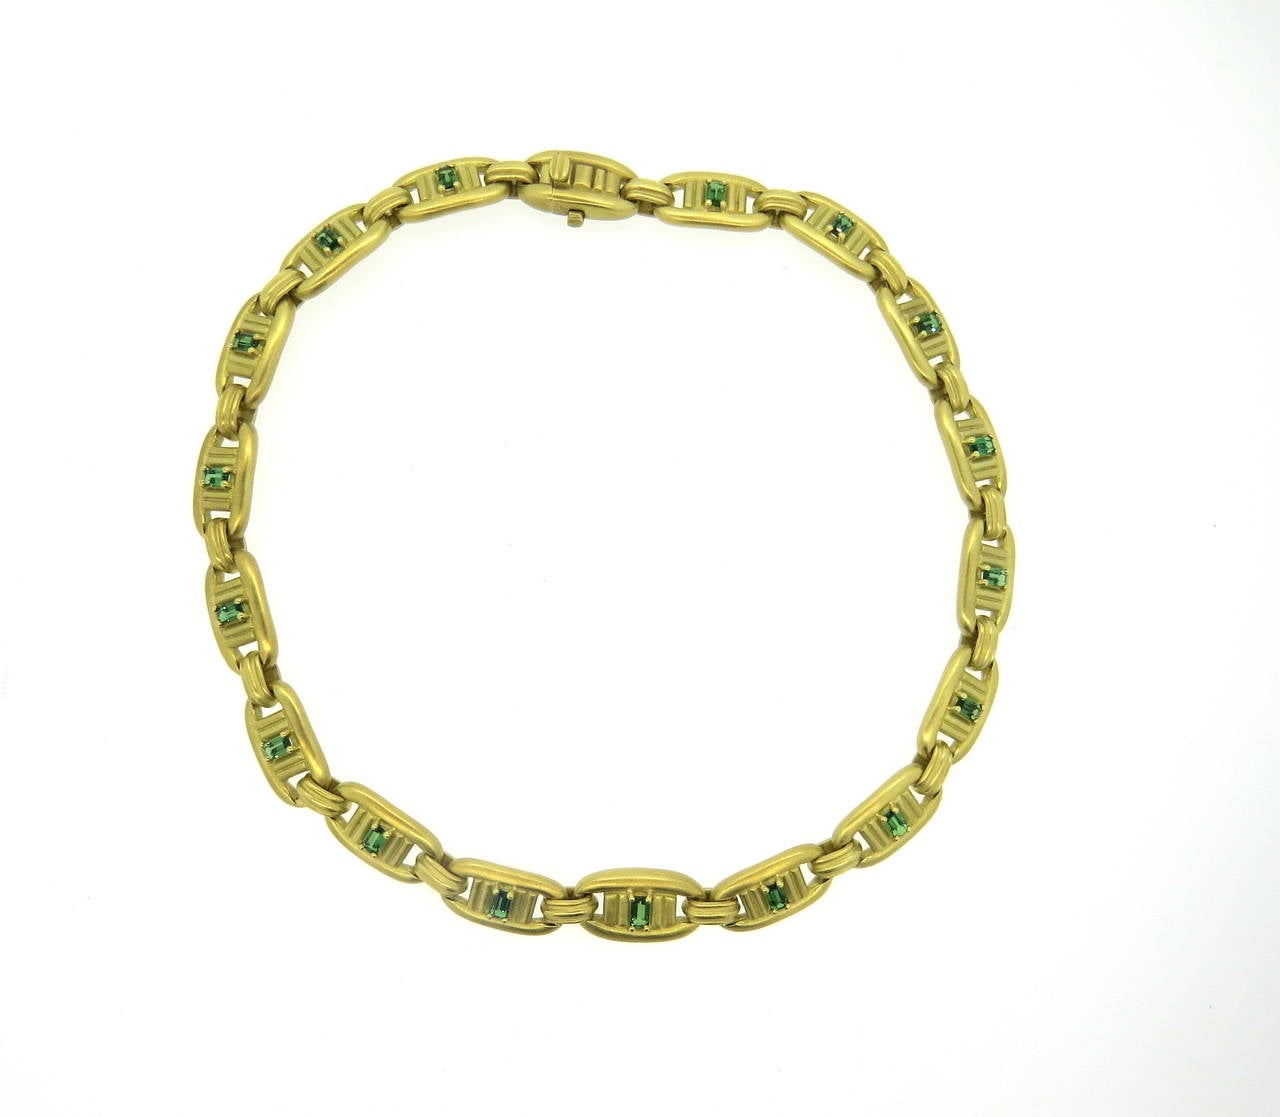 1980s 18k gold necklace, crafted by Barry Kieselstein Cord, set with emerald cut 5mm x 3mm green tourmalines. Necklace is 16 3/8